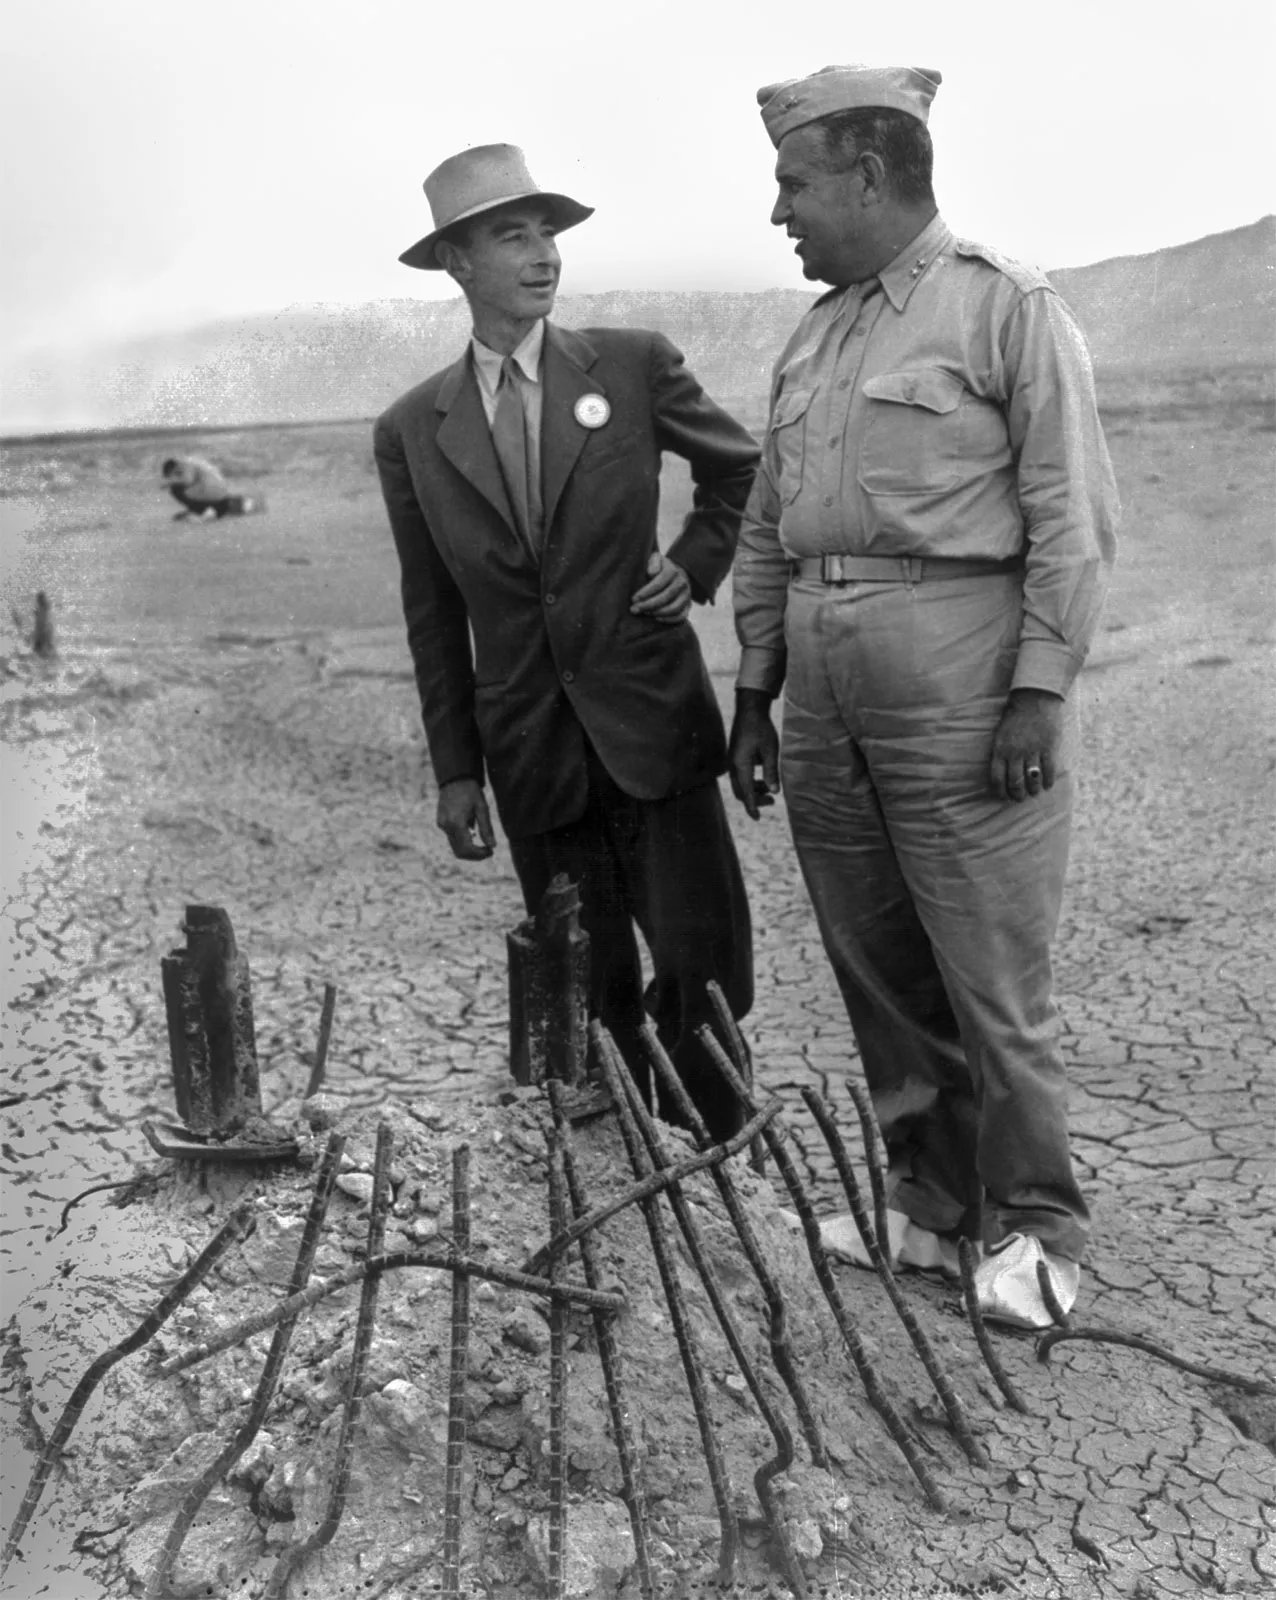 J. Robert Oppenheimer (left) and Gen. Leslie R. Groves examining the remains of a steel tower at the Trinity test site in Alamogordo, New Mexico, September 1945.